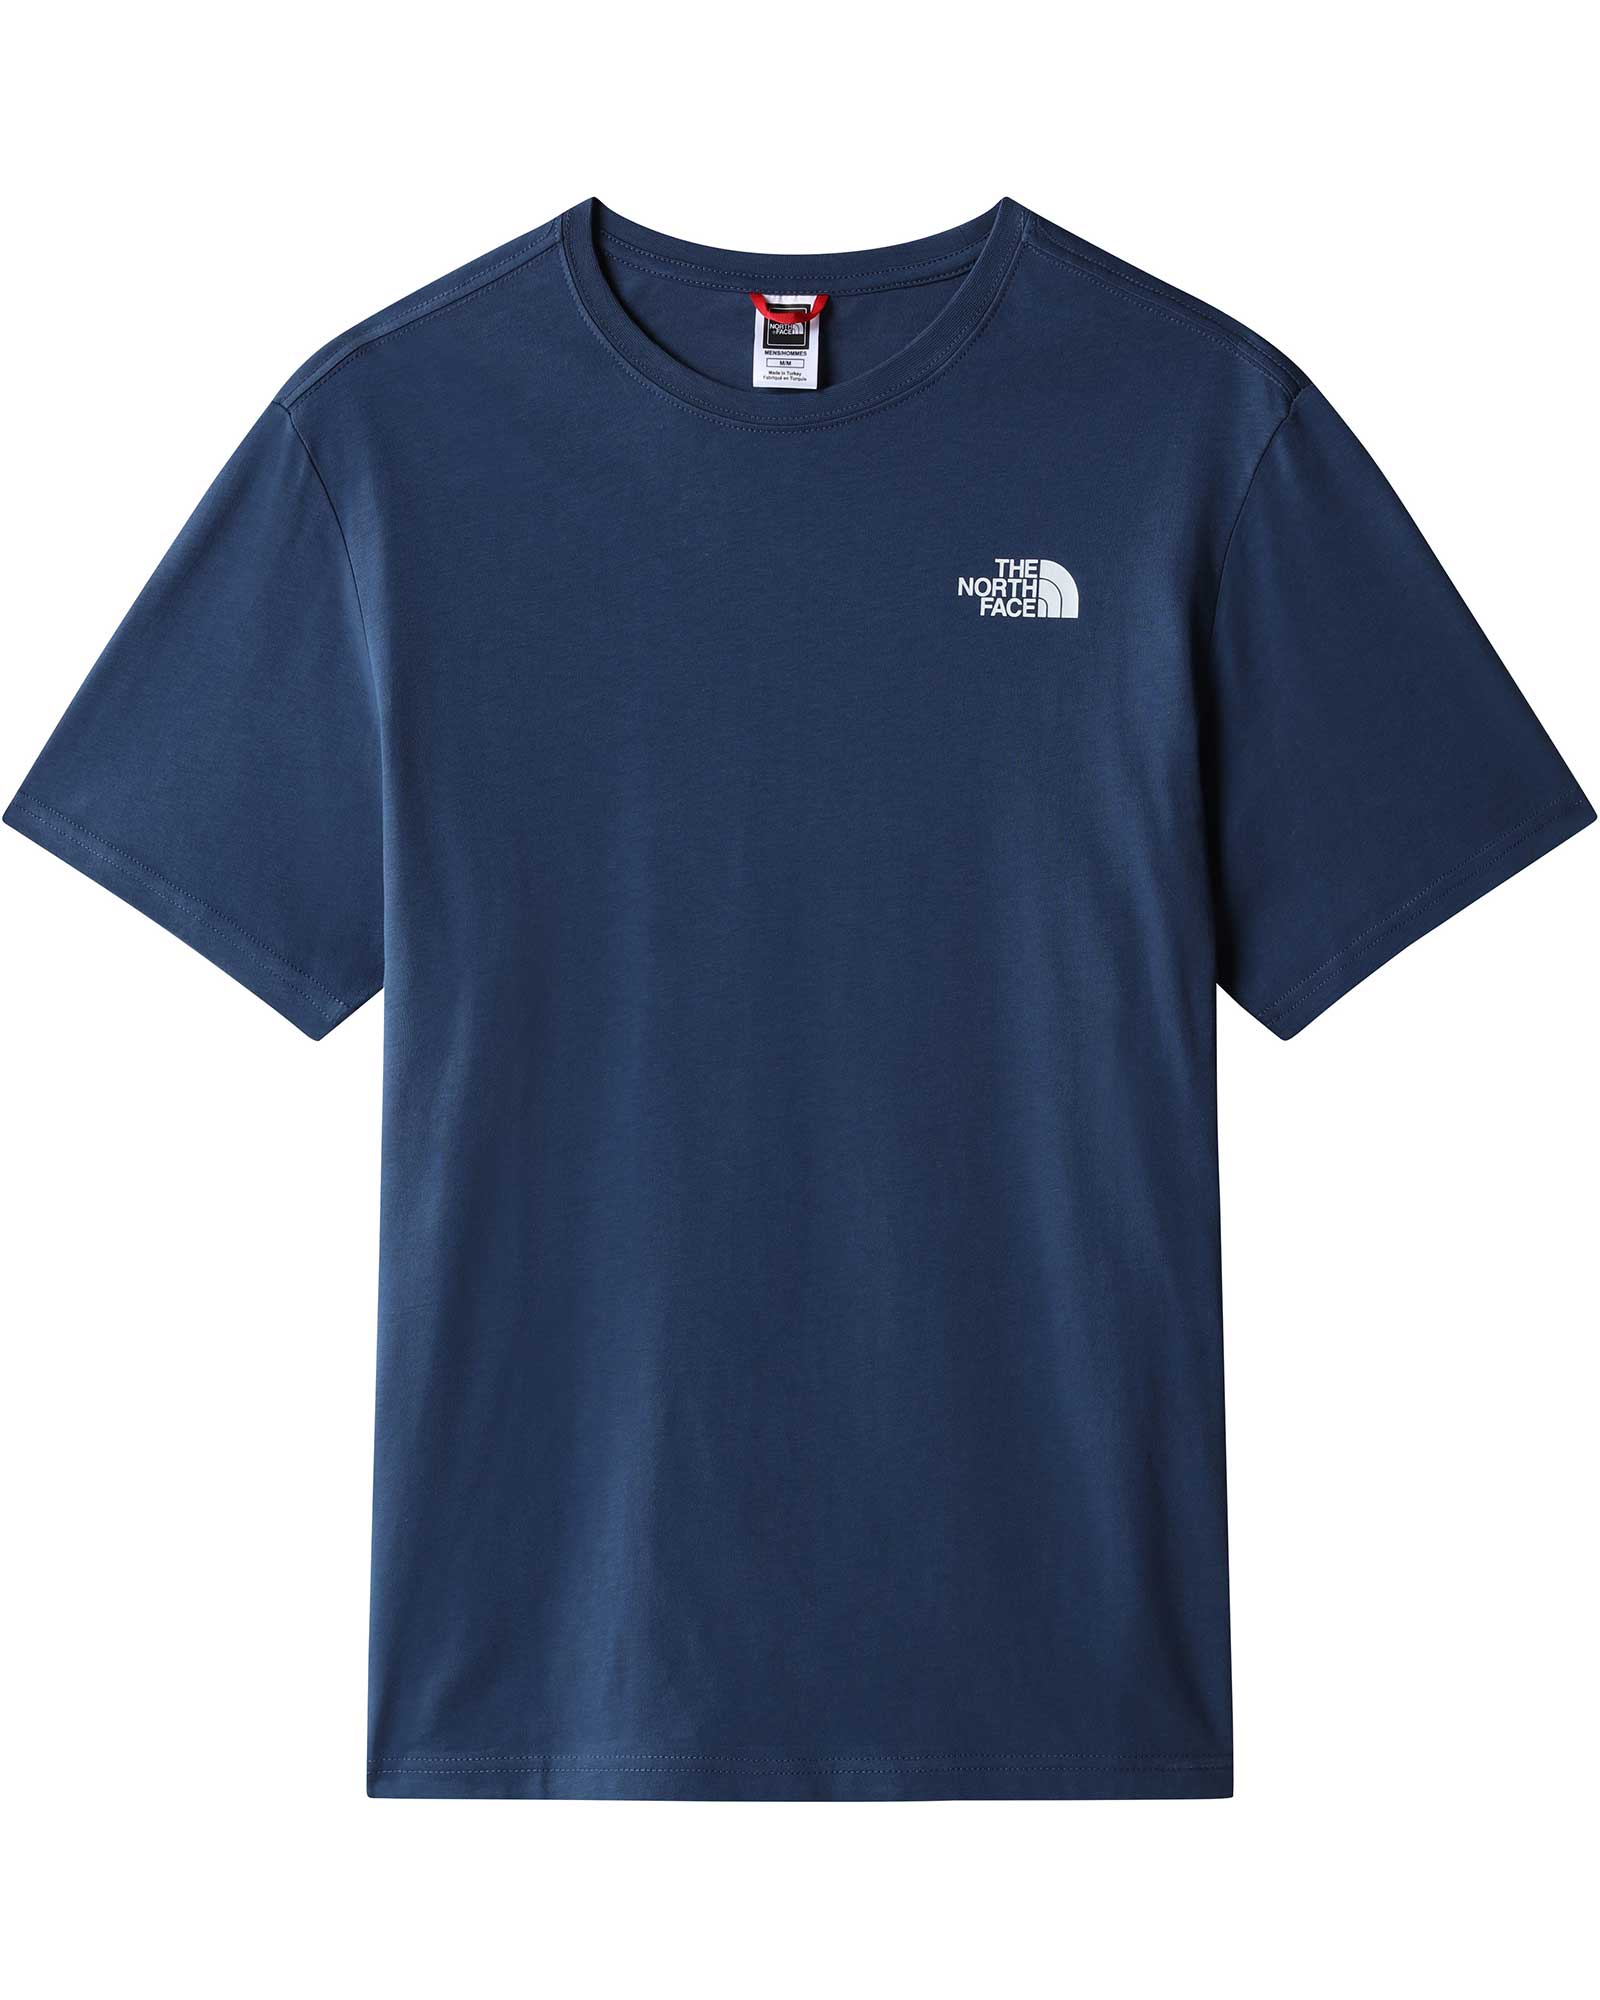 The North Face Red Box Men’s T Shirt - Shady Blue L